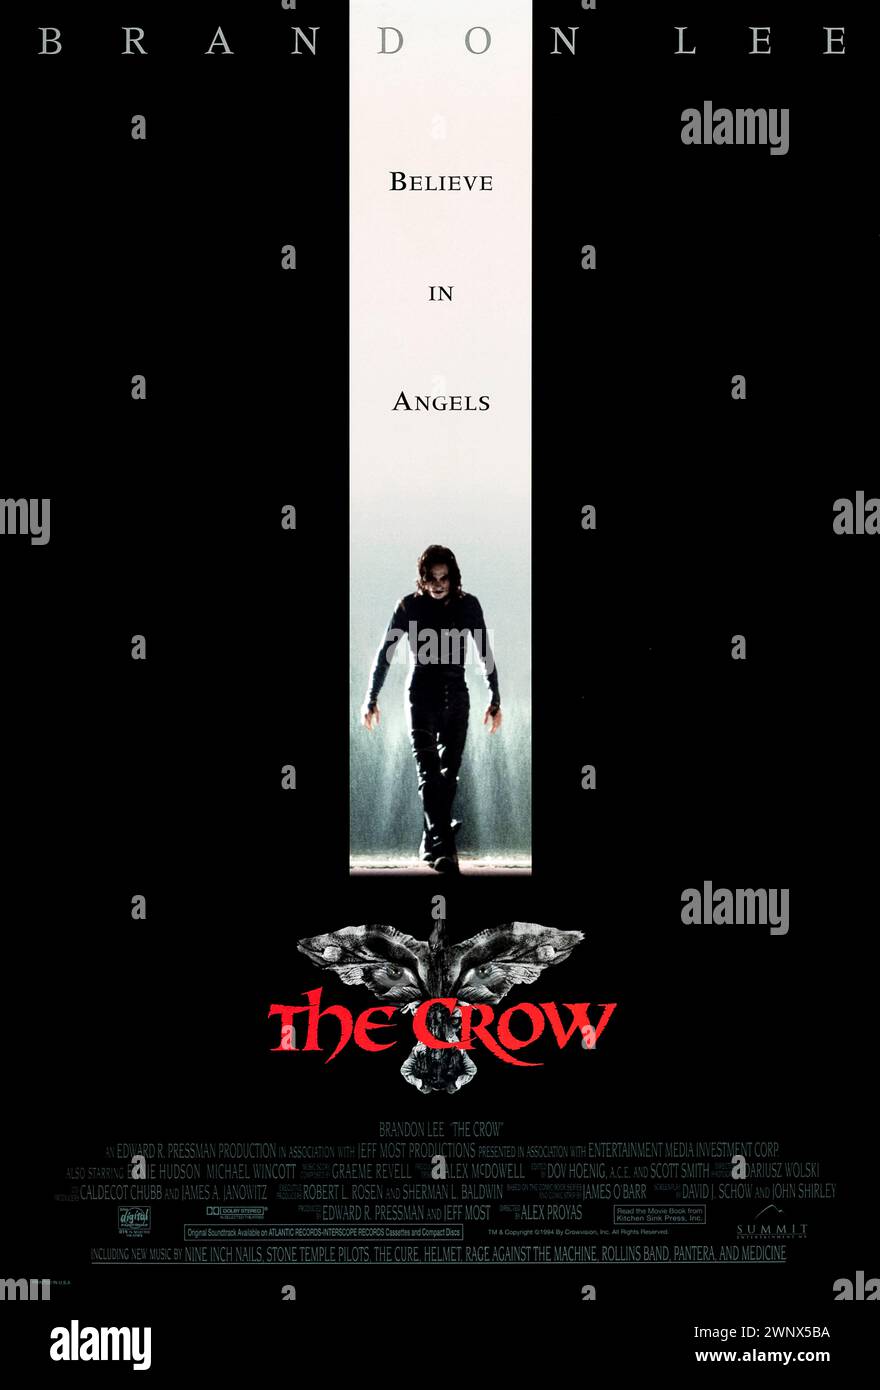 The Crow (1994) directed by Alex Proyas and starring Brandon Lee, Michael Wincott and Rochelle Davis. Big screen adaptation of James O'Barr's comic book series about a brutally murdered man who comes back from the dead to avenge his own death and that of his fiancée. Photograph of an original 1994 US one sheet poster. ***EDITORIAL USE ONLY*** Credit: BFA / Miramax Films Stock Photo